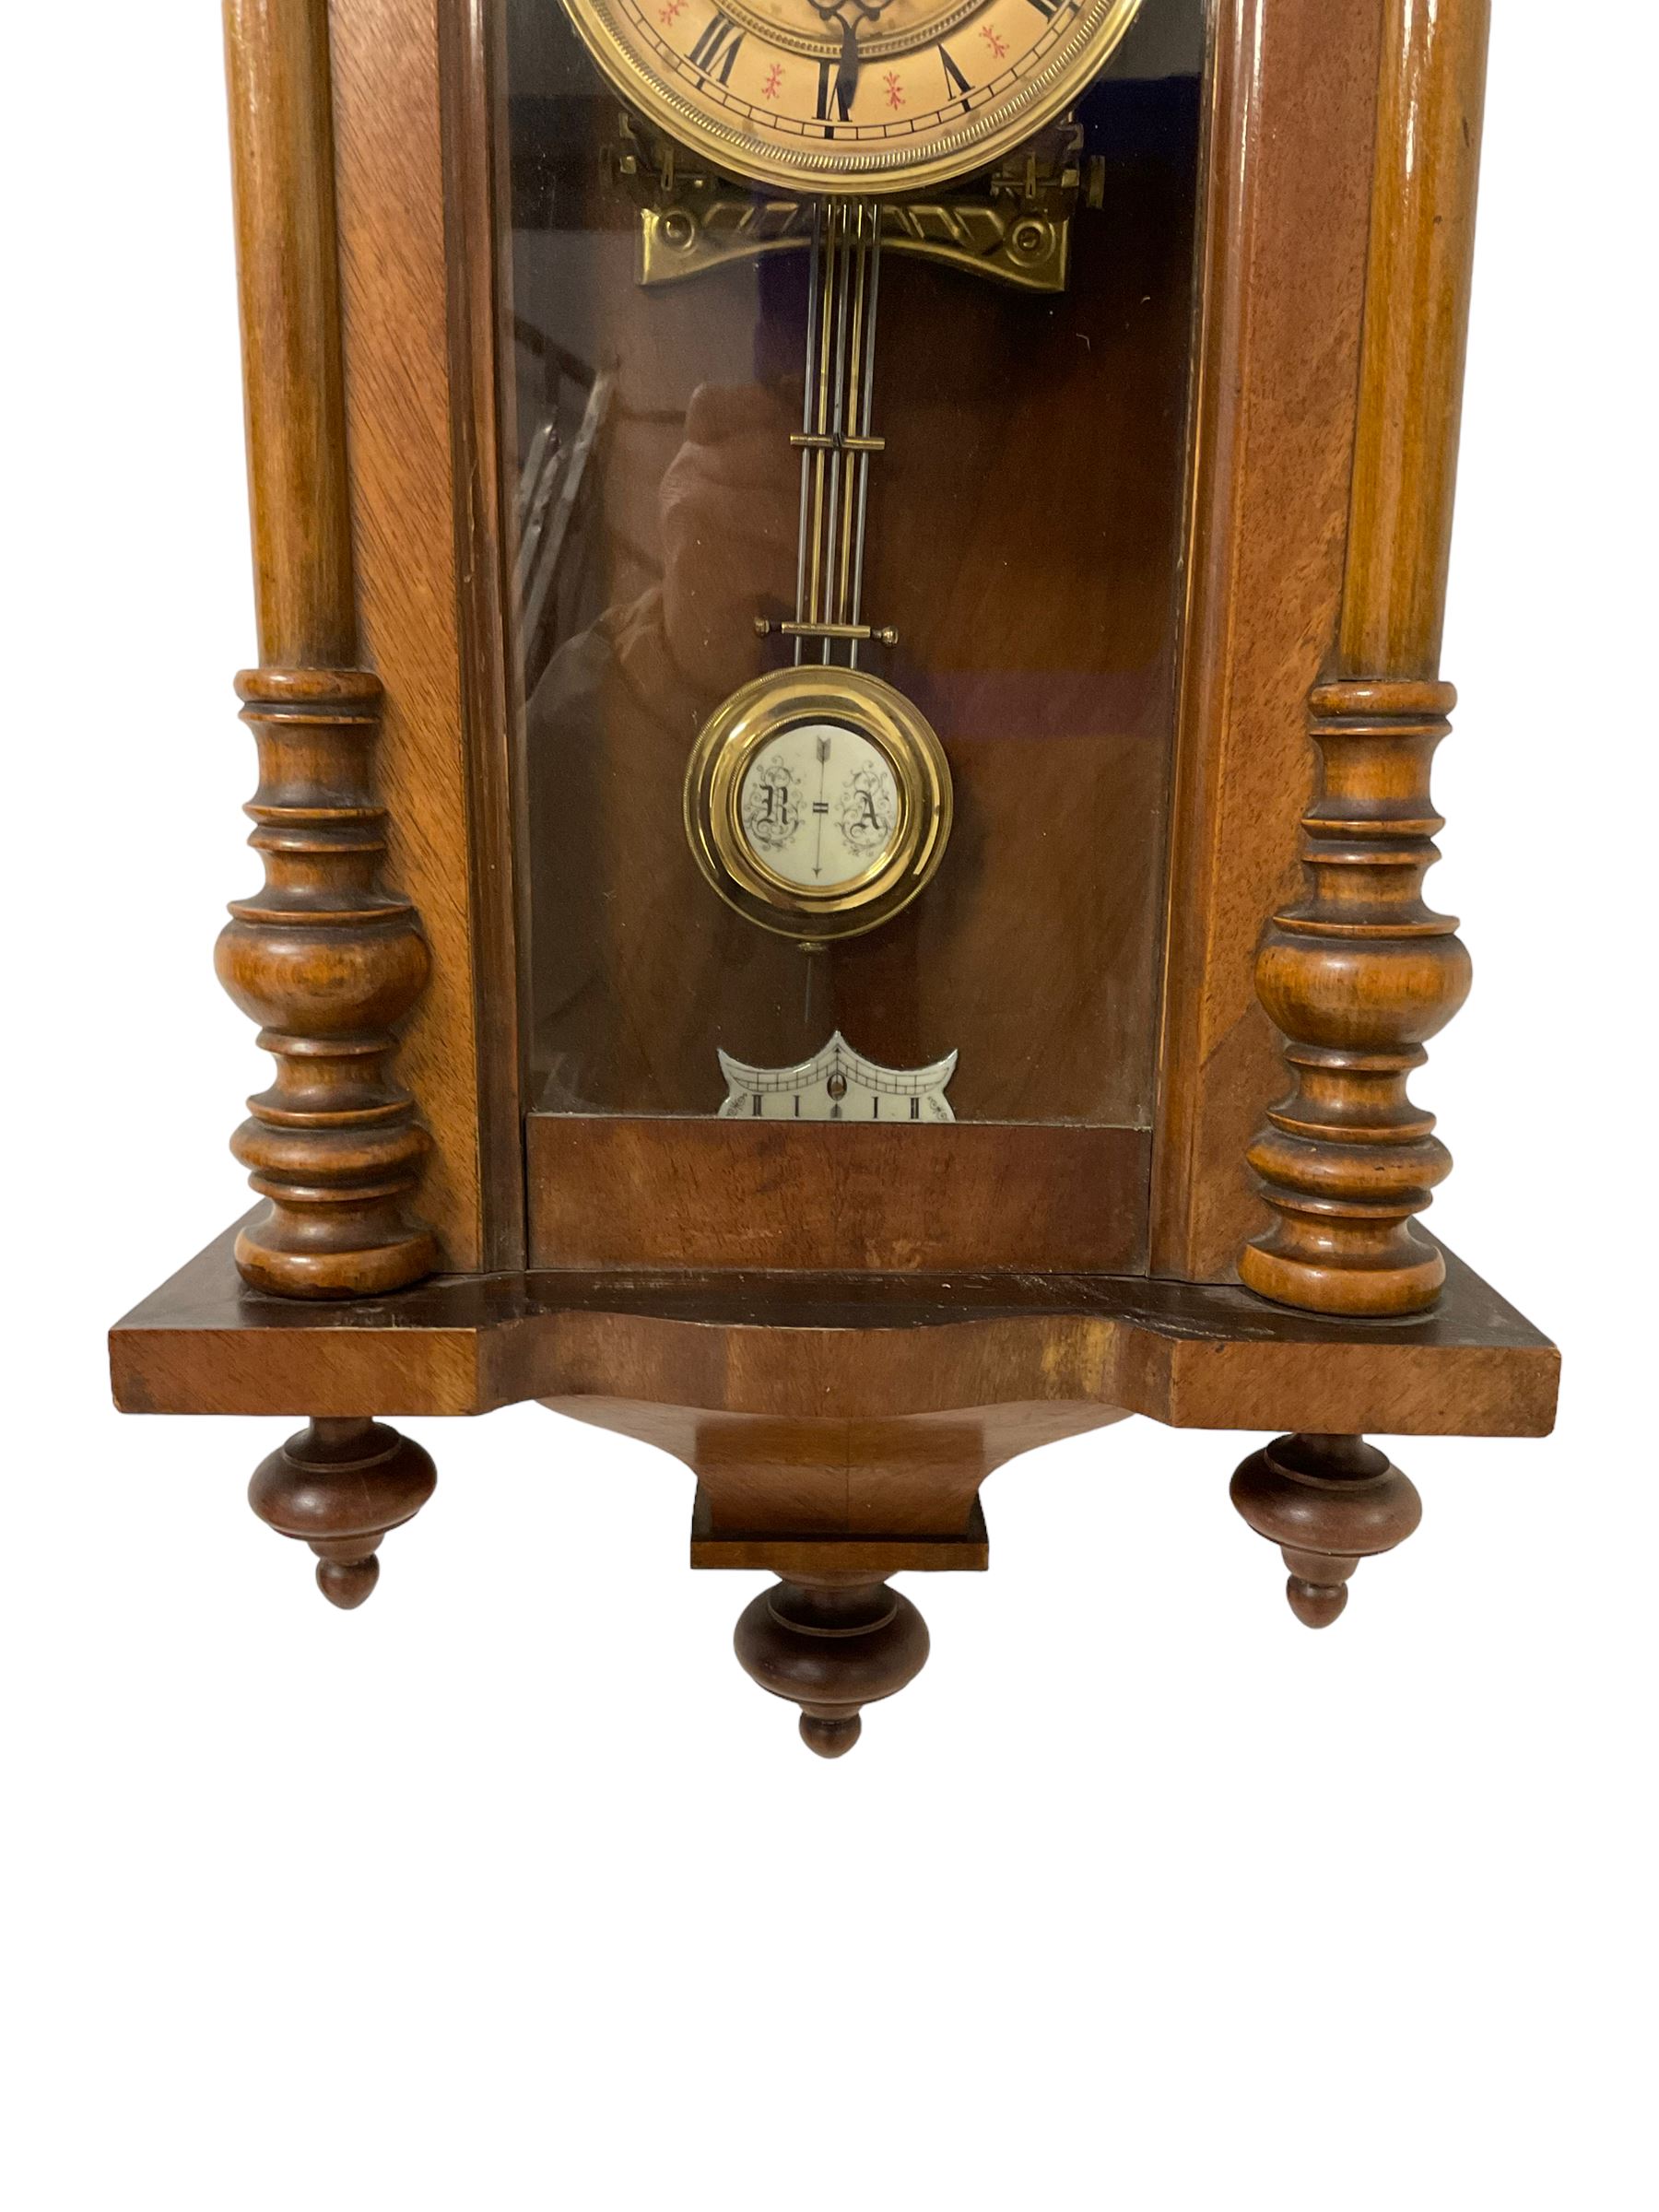 German - 19th-century spring driven wall clock with pendulum and key. - Image 3 of 3